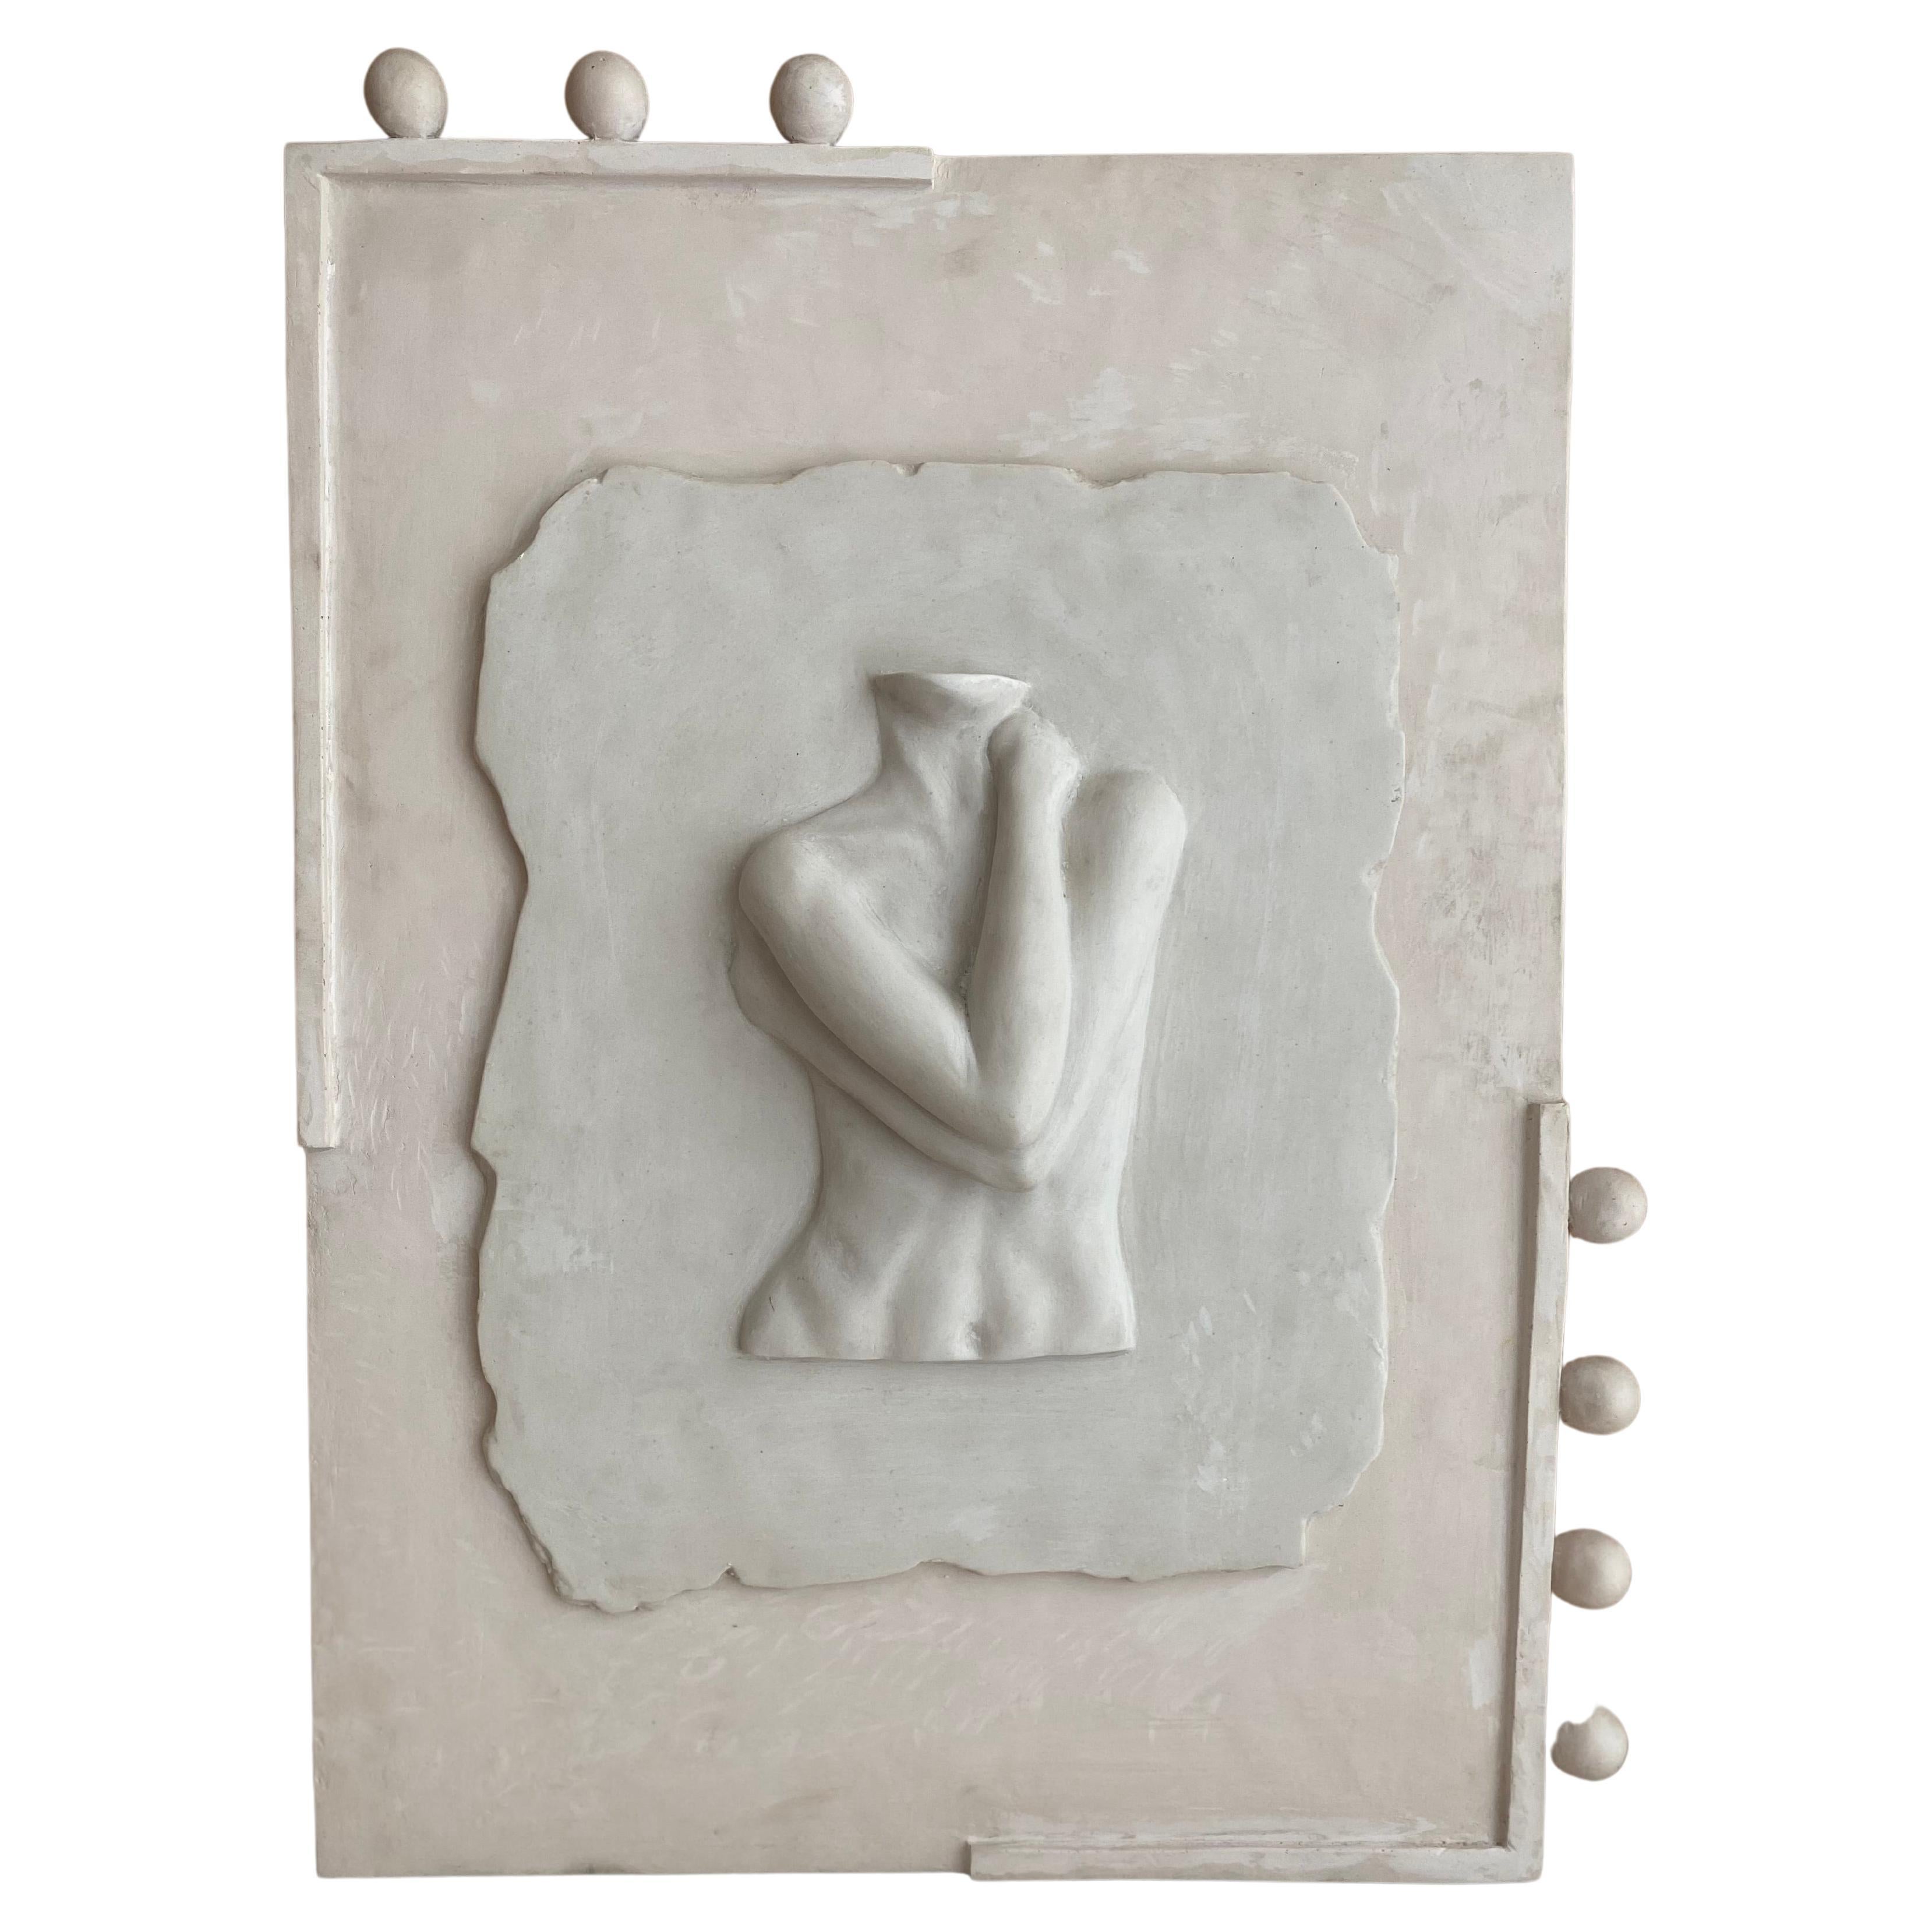 Marcela Cure Female Torso and Arms Wall Art Sculpture Resin and Stone Number 25